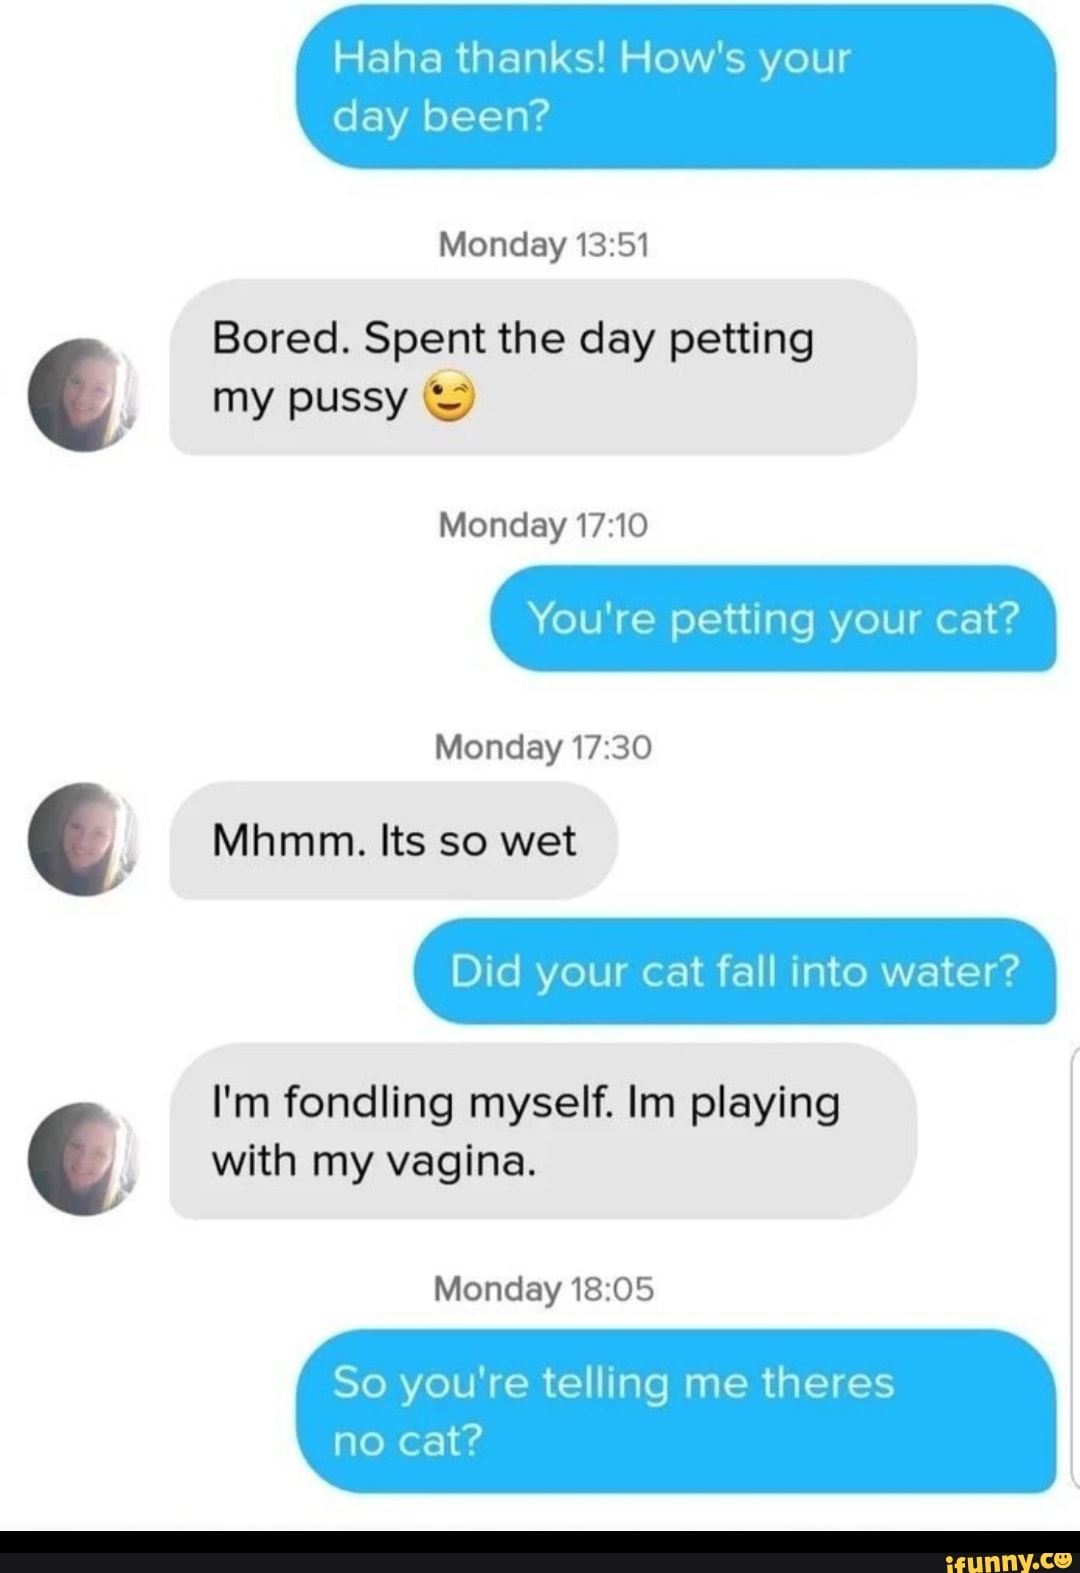 I play with my cunt by the water